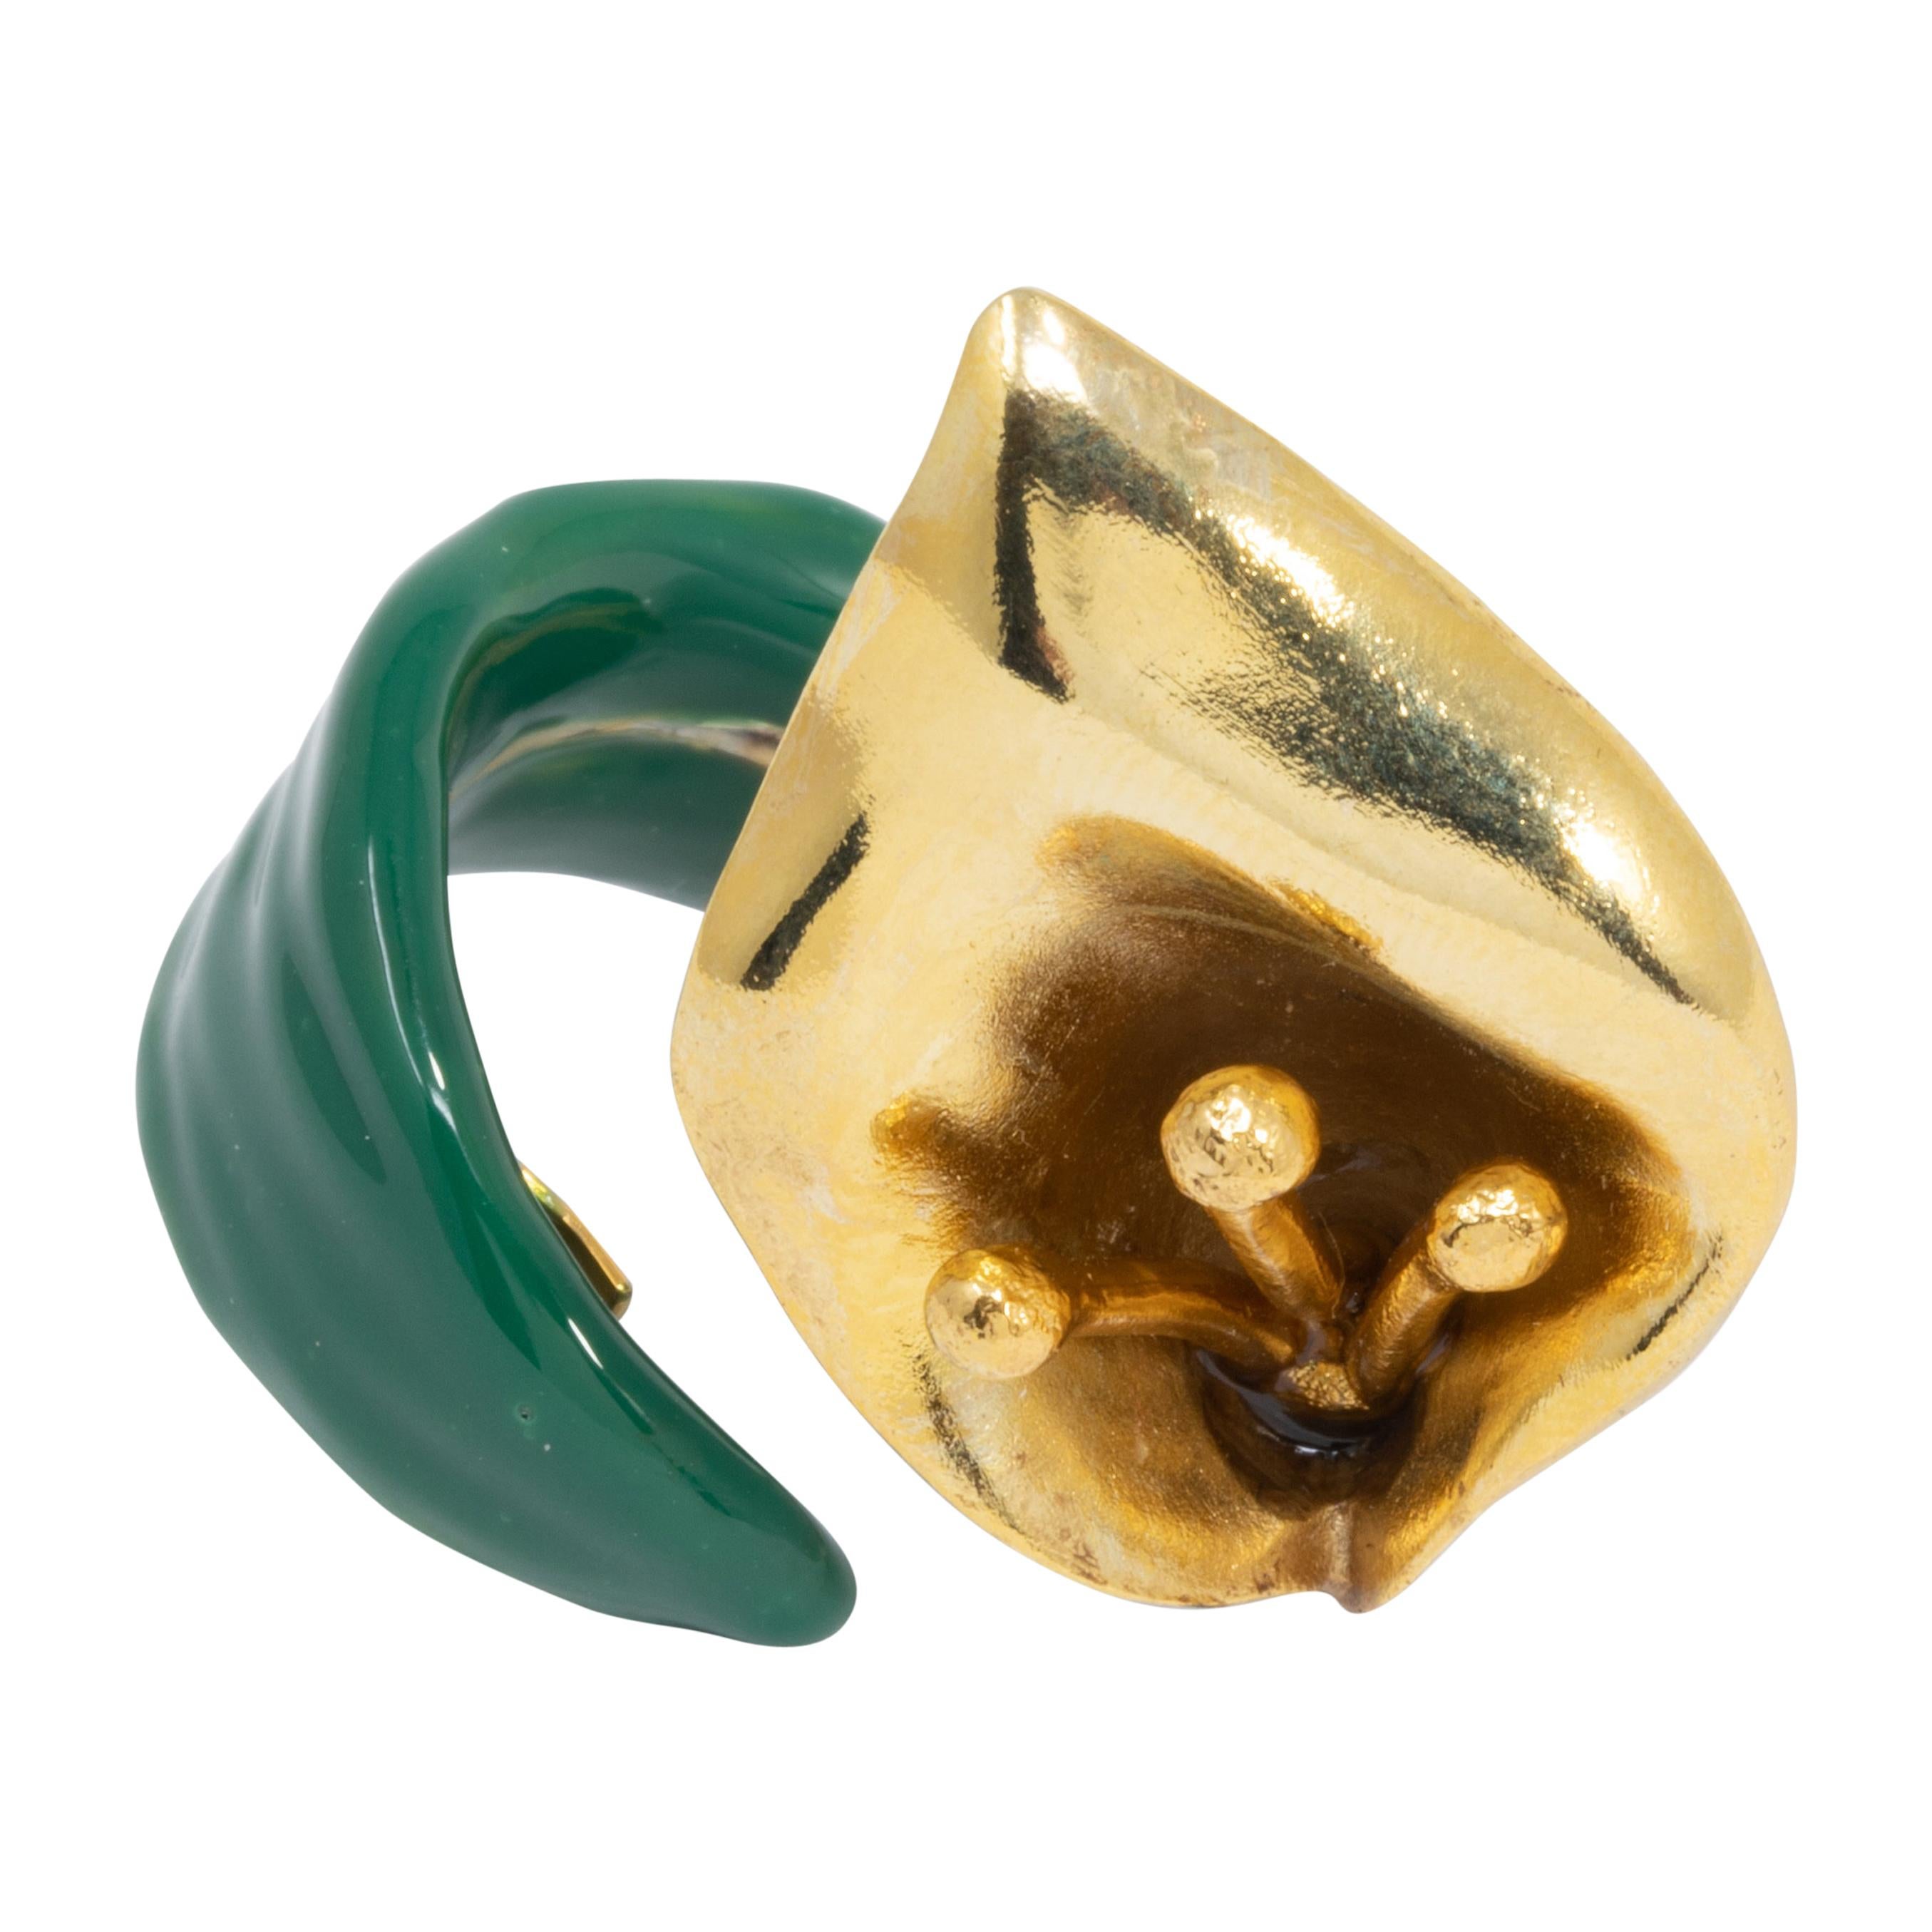 Oscar de la Renta Painted Calla Lily Cocktail Ring, Green and White Enamel, Gold For Sale